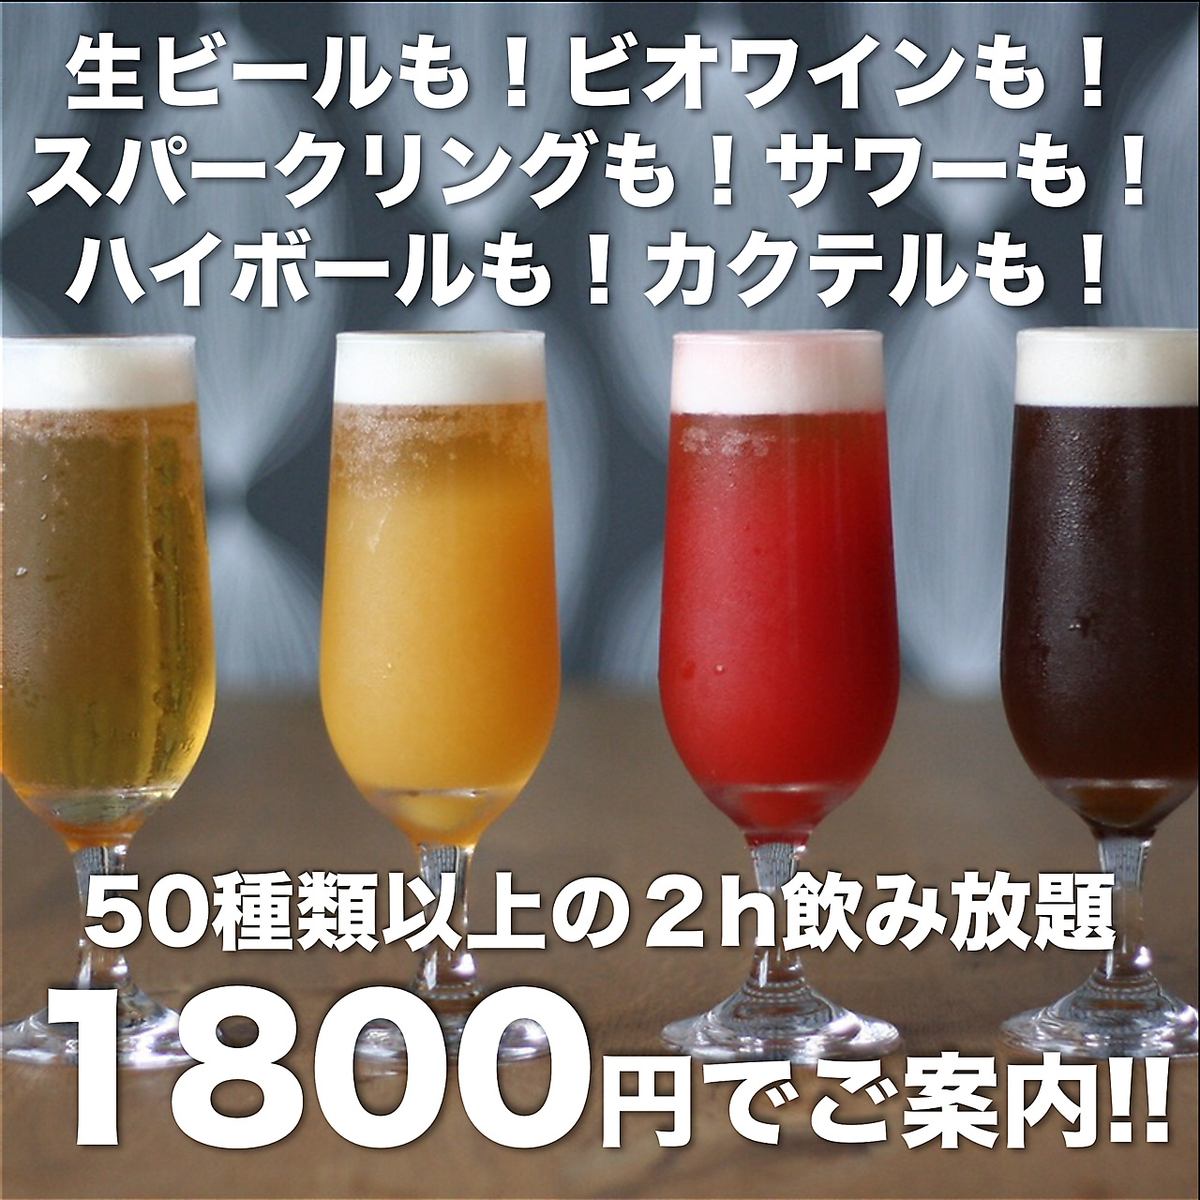 All-you-can-drink for 2 hours for 1,800 yen! Popular for girls' parties and banquets.